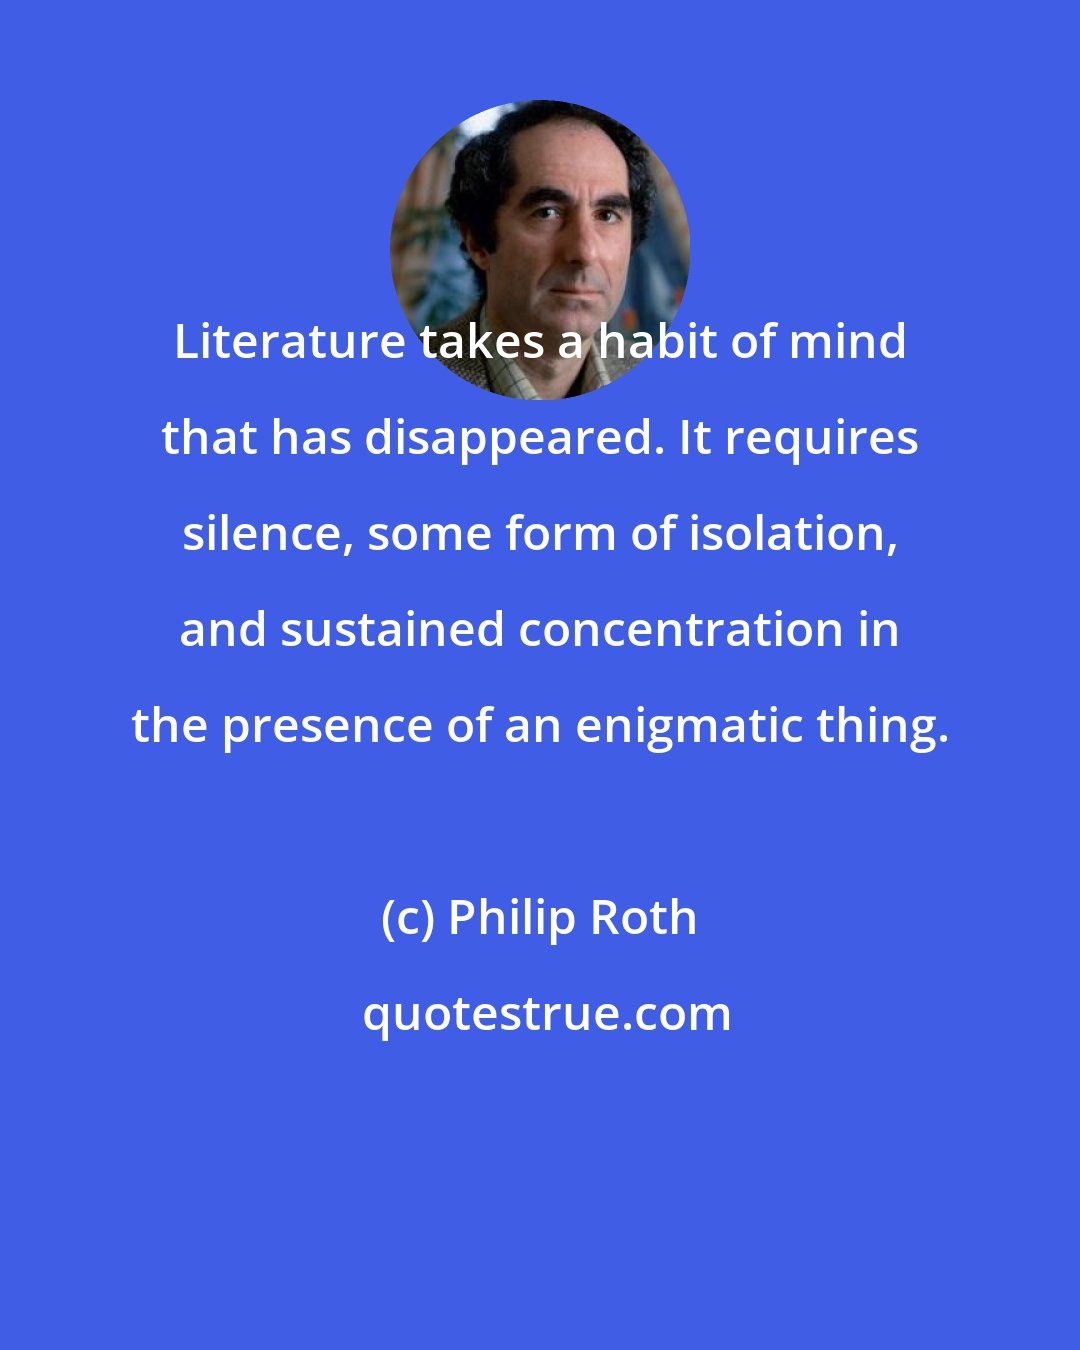 Philip Roth: Literature takes a habit of mind that has disappeared. It requires silence, some form of isolation, and sustained concentration in the presence of an enigmatic thing.